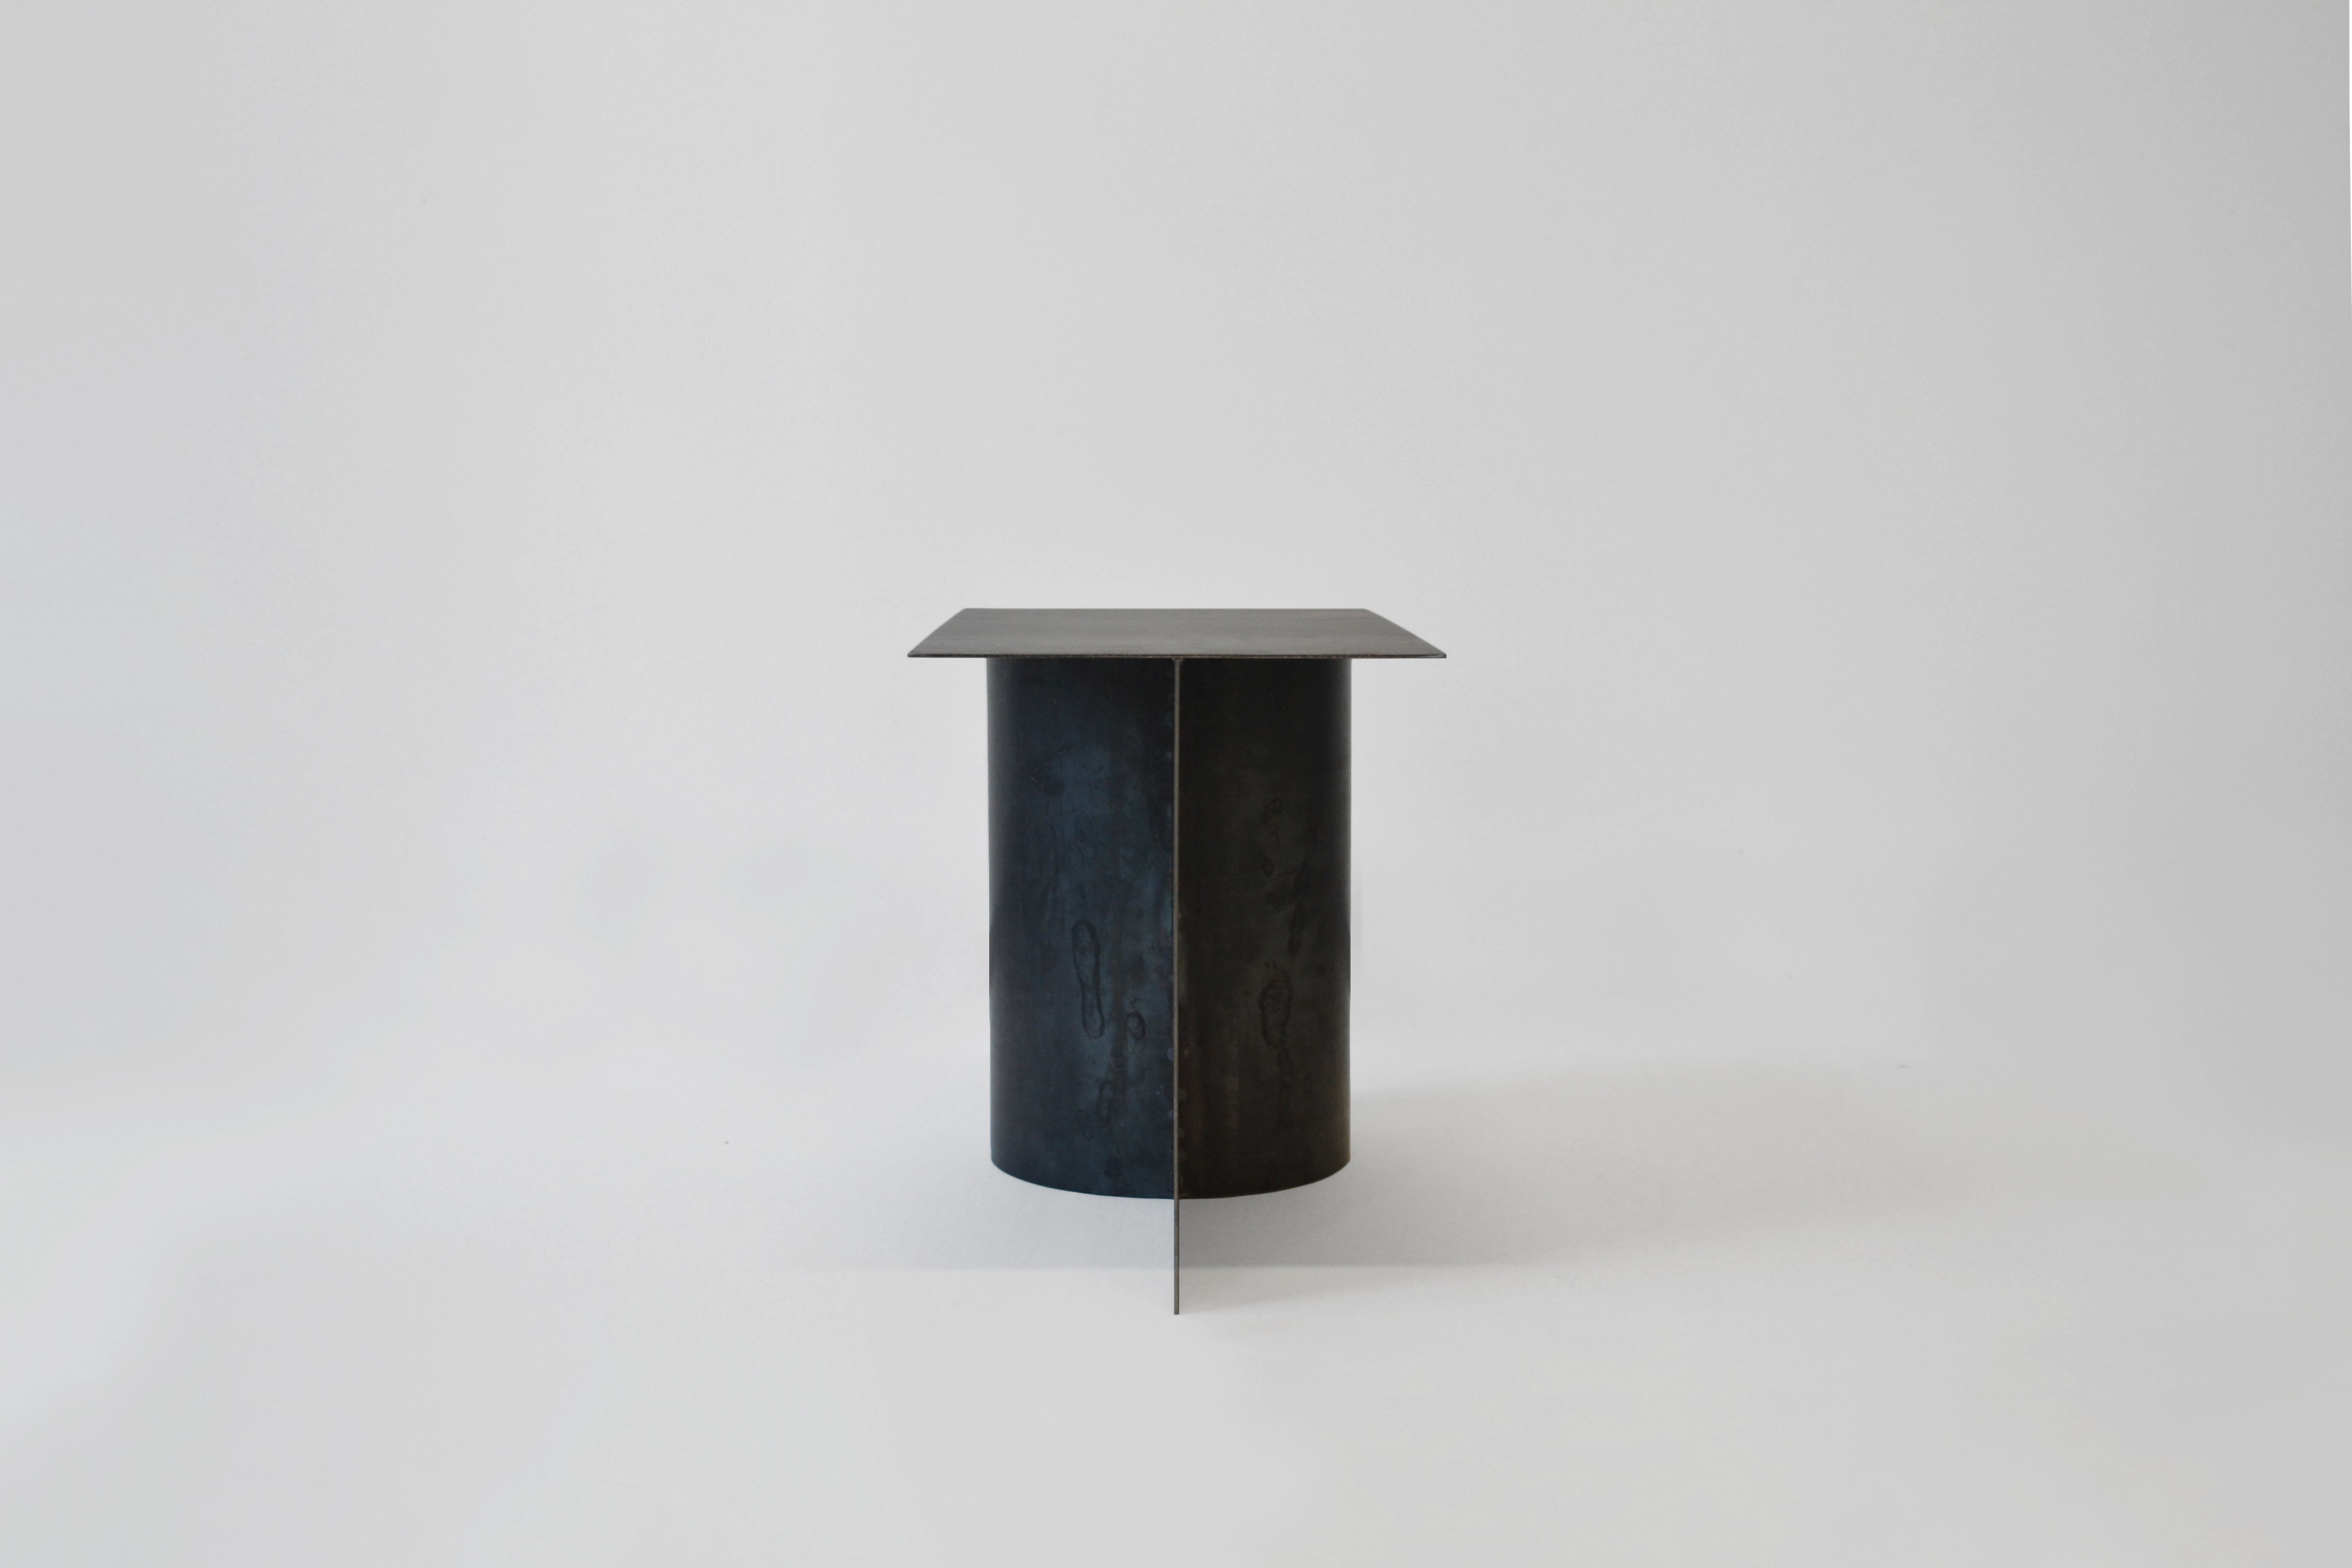 Table Ferro Blue, part of personal collection, Ferro collection, 2019 by CARA/DAVIDE. Table. © CARA/DAVIDE